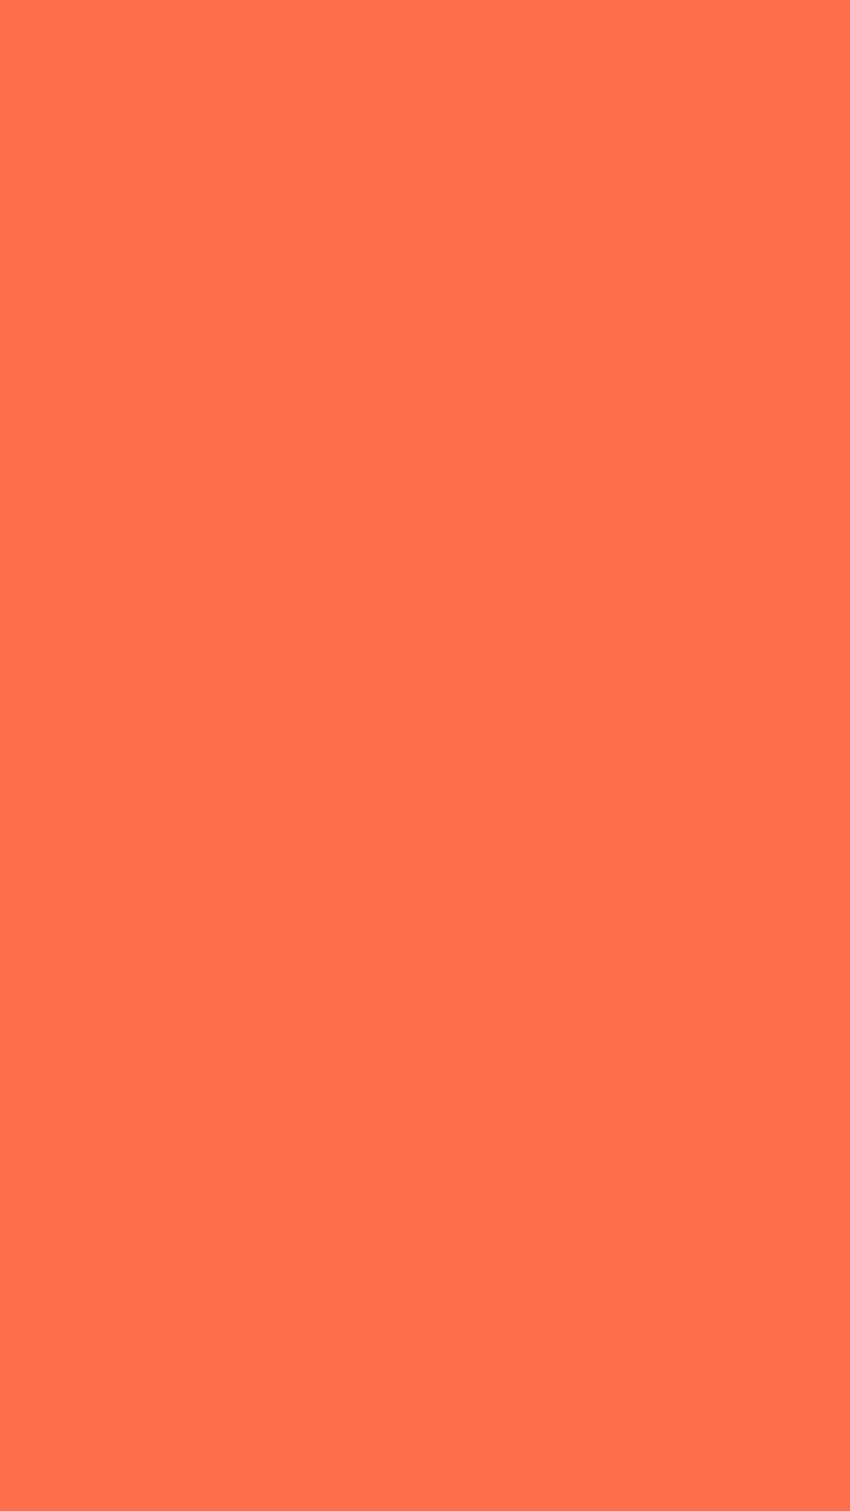 1080x1920 Outrageous Orange Solid Color Backgrounds, solid orange HD phone wallpaper